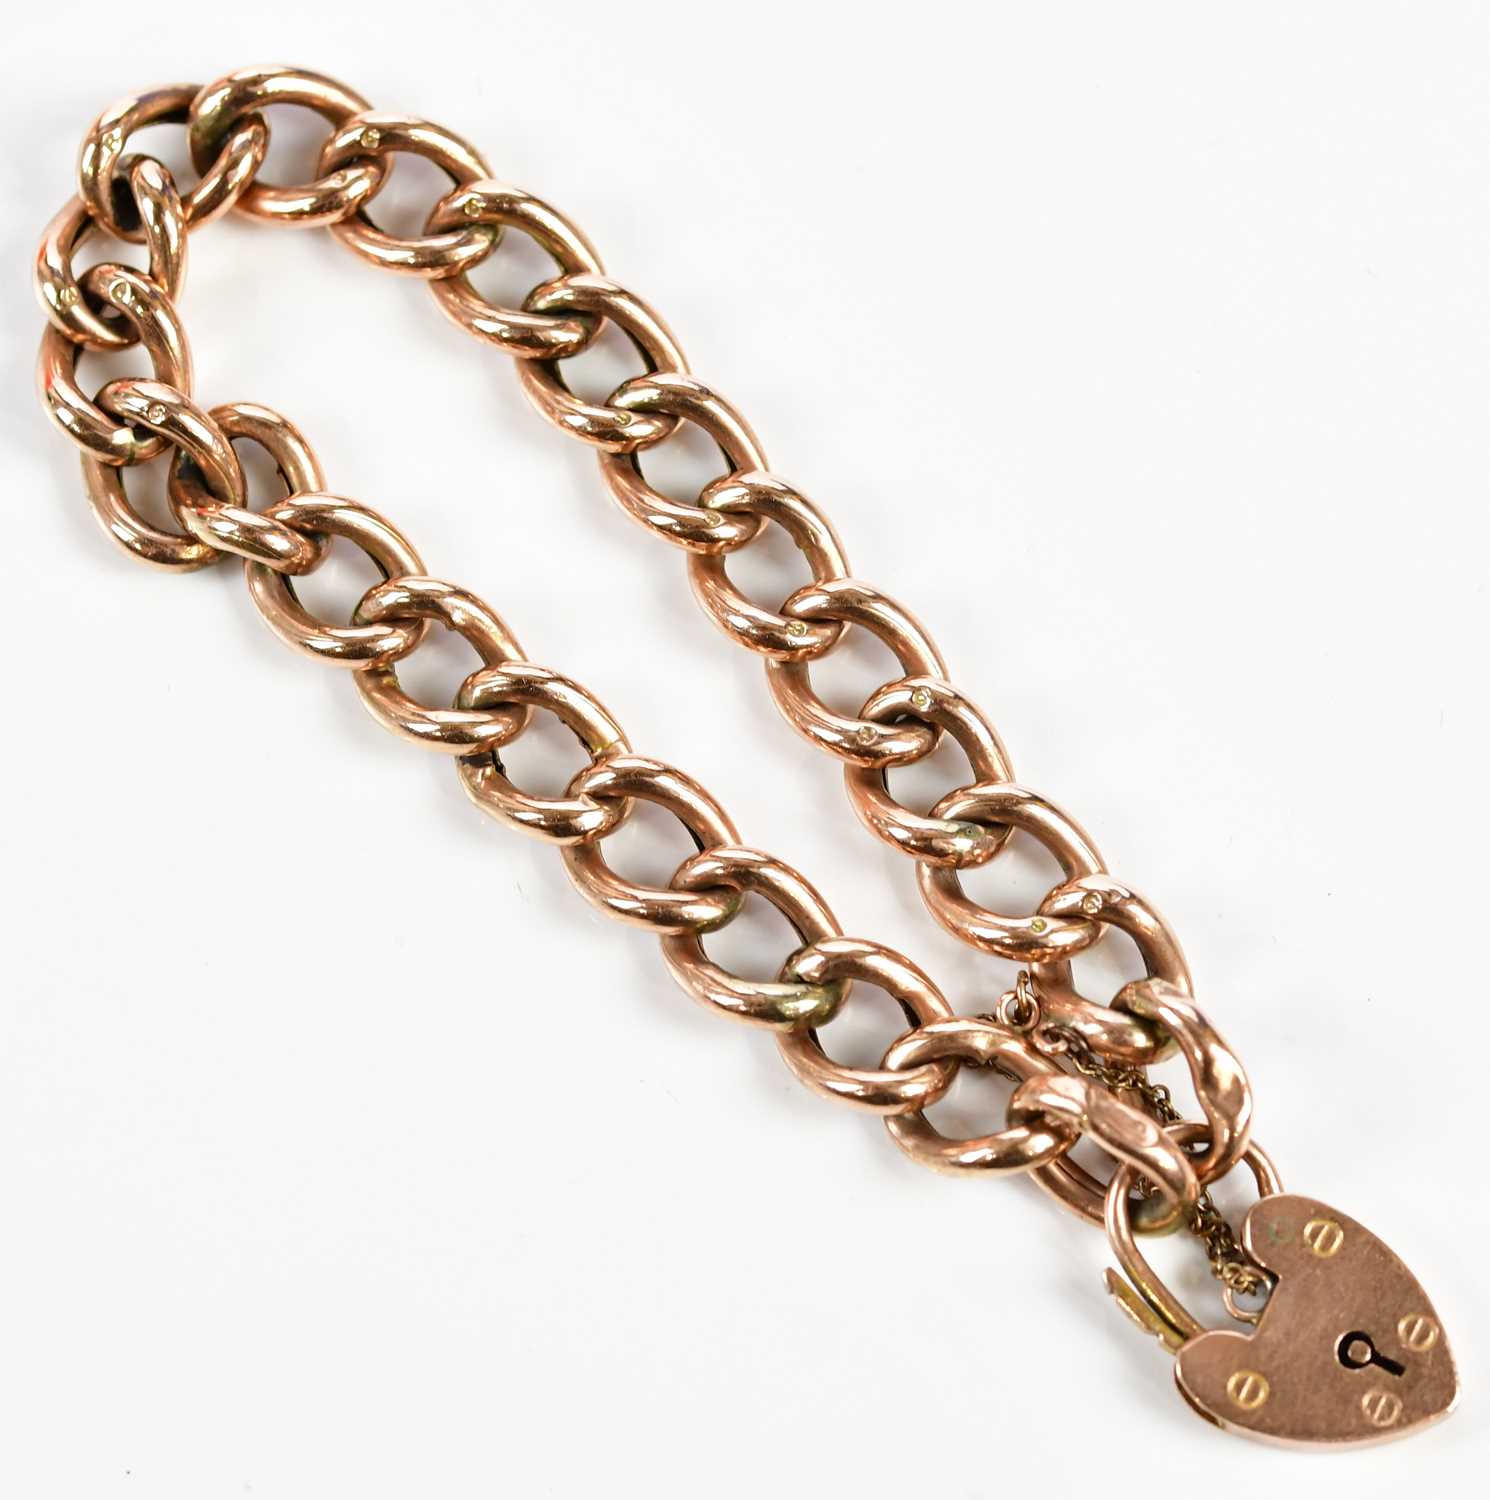 A 9ct rose gold hollow curb link bracelet with padlock and safety chain, approx. 15.85g.